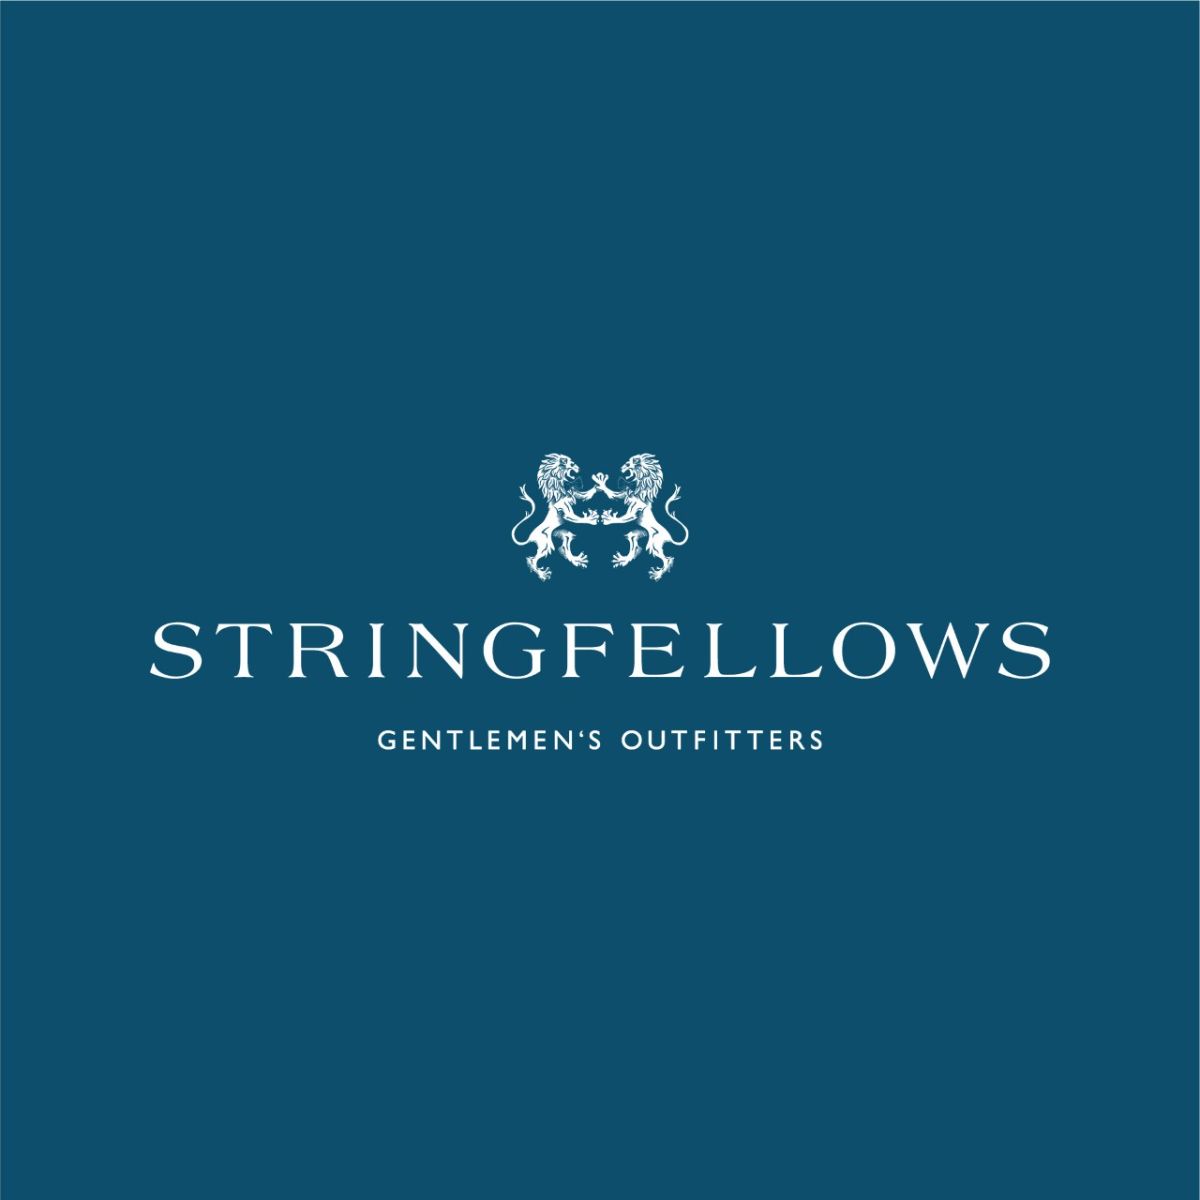 Stringfellows Gentlemen's Outfitters-Image-1